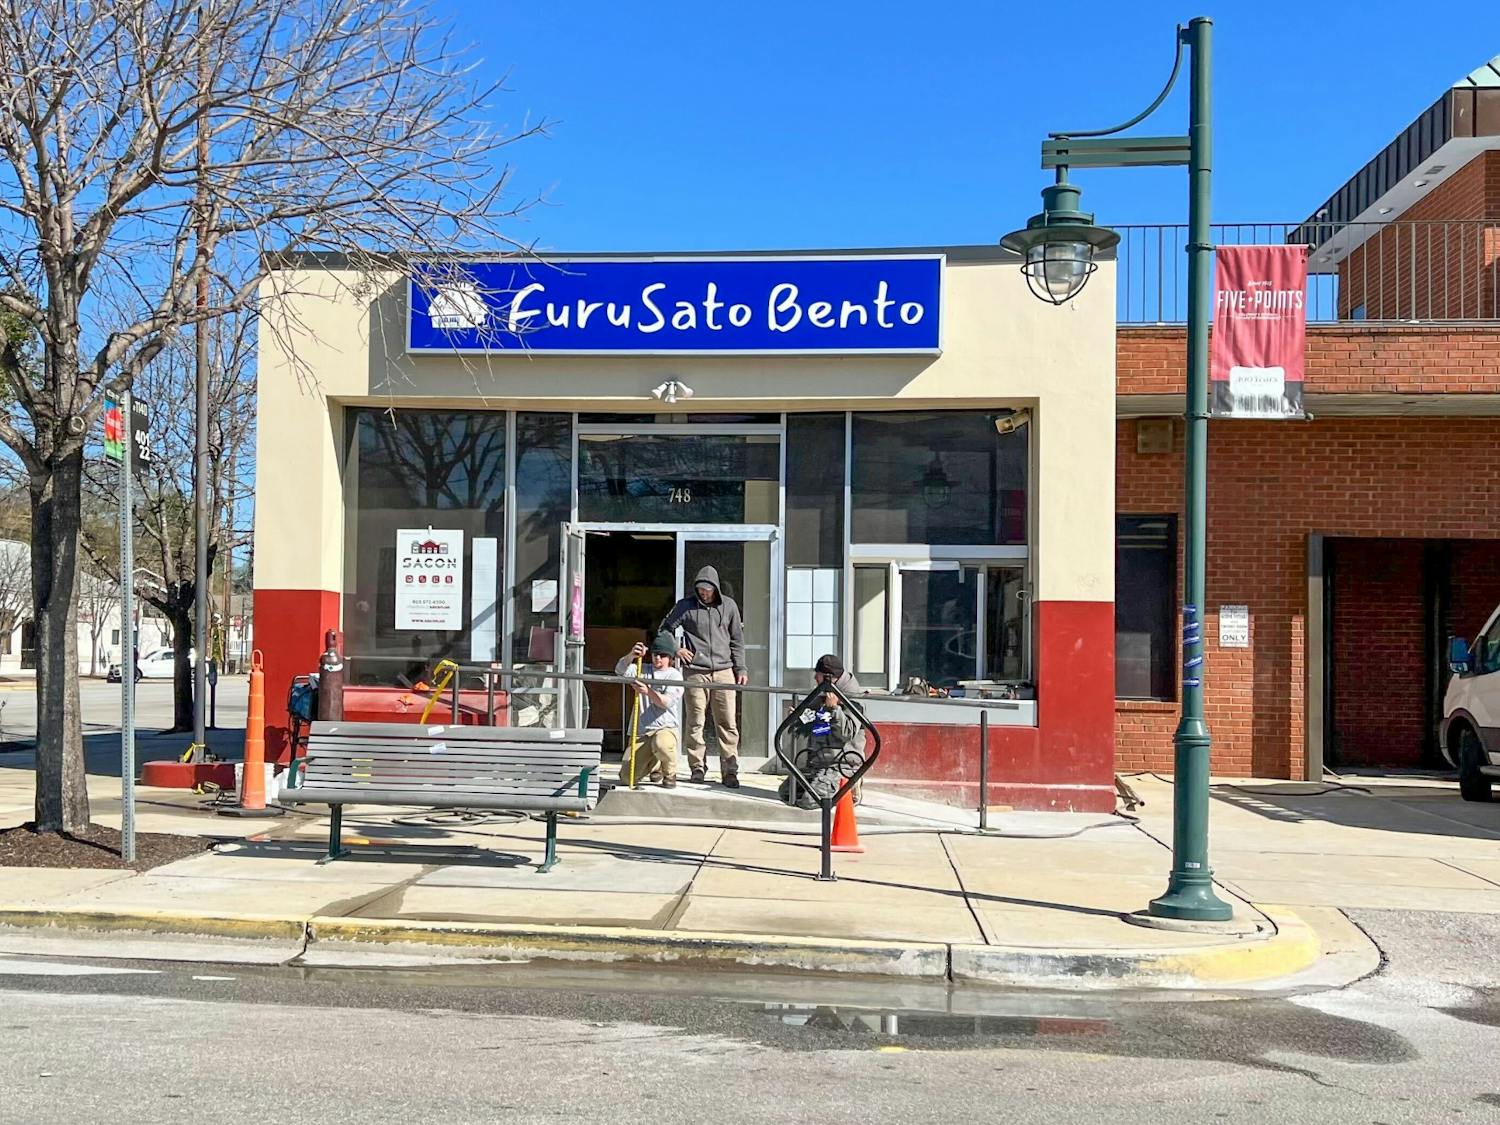 Furusato Bento is currently under construction in Five Points in Columbia, SC. The new restaurant, from the owners of Menkoi Ramen House, will feature Japanese-inspired bento boxes and Japanese drinks and snacks.